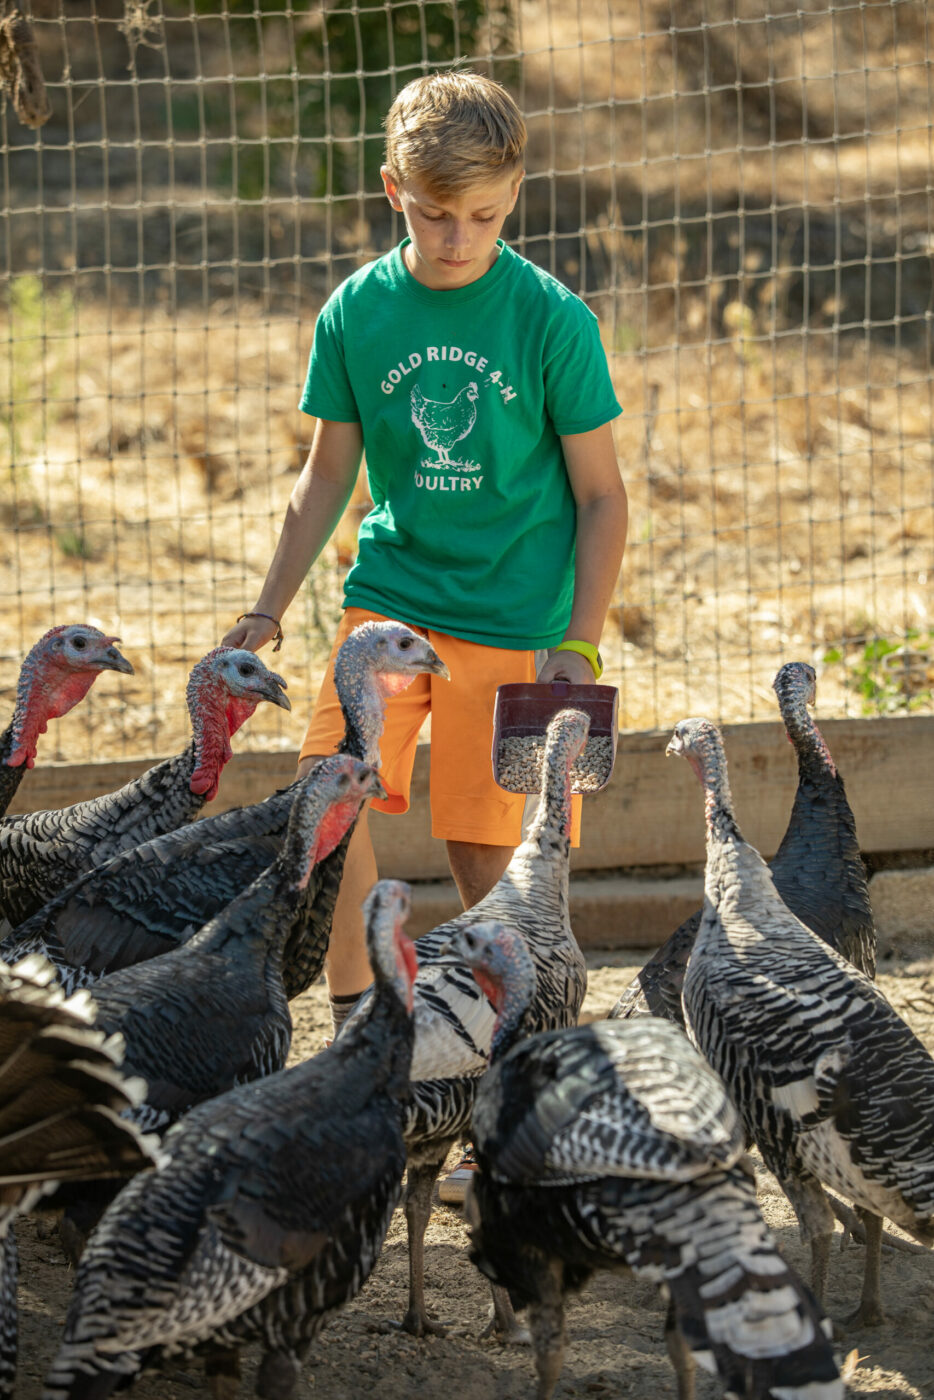 Local students involved in the Heritage Turkey Project learn all aspects of raising poultry, including diet and behavior. (Chad Surmick/The Press Democrat)